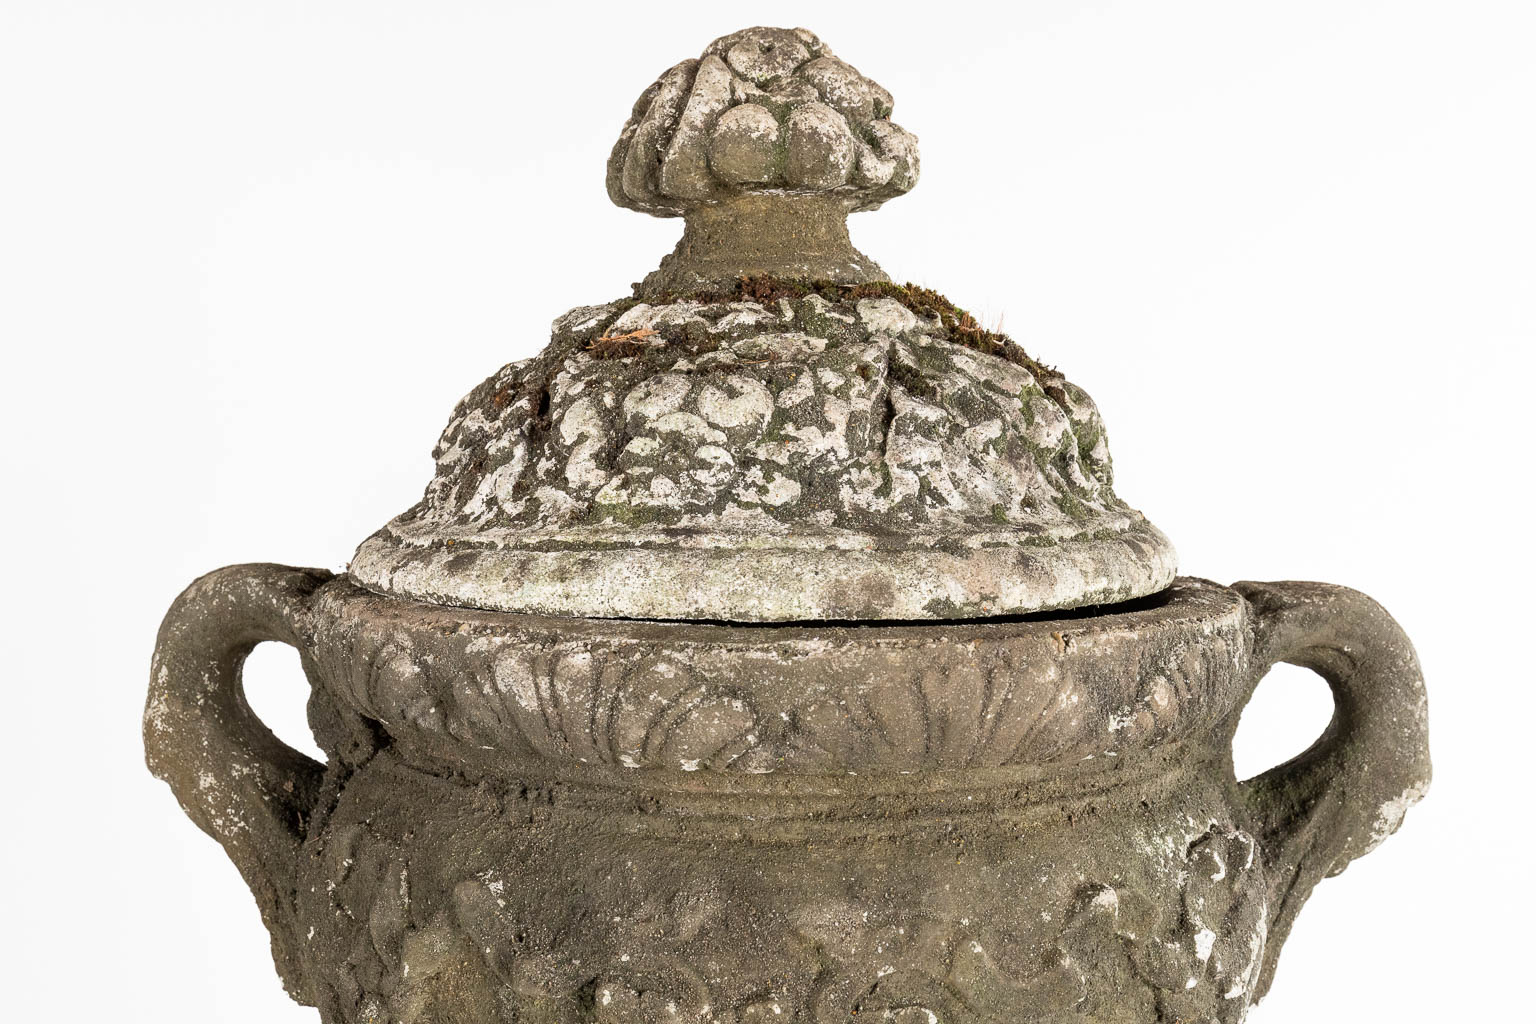 A pair of large urns with a lid, standing on a pedestal, concrete, 20th C. (D:50 x W:67 x H:173 cm)